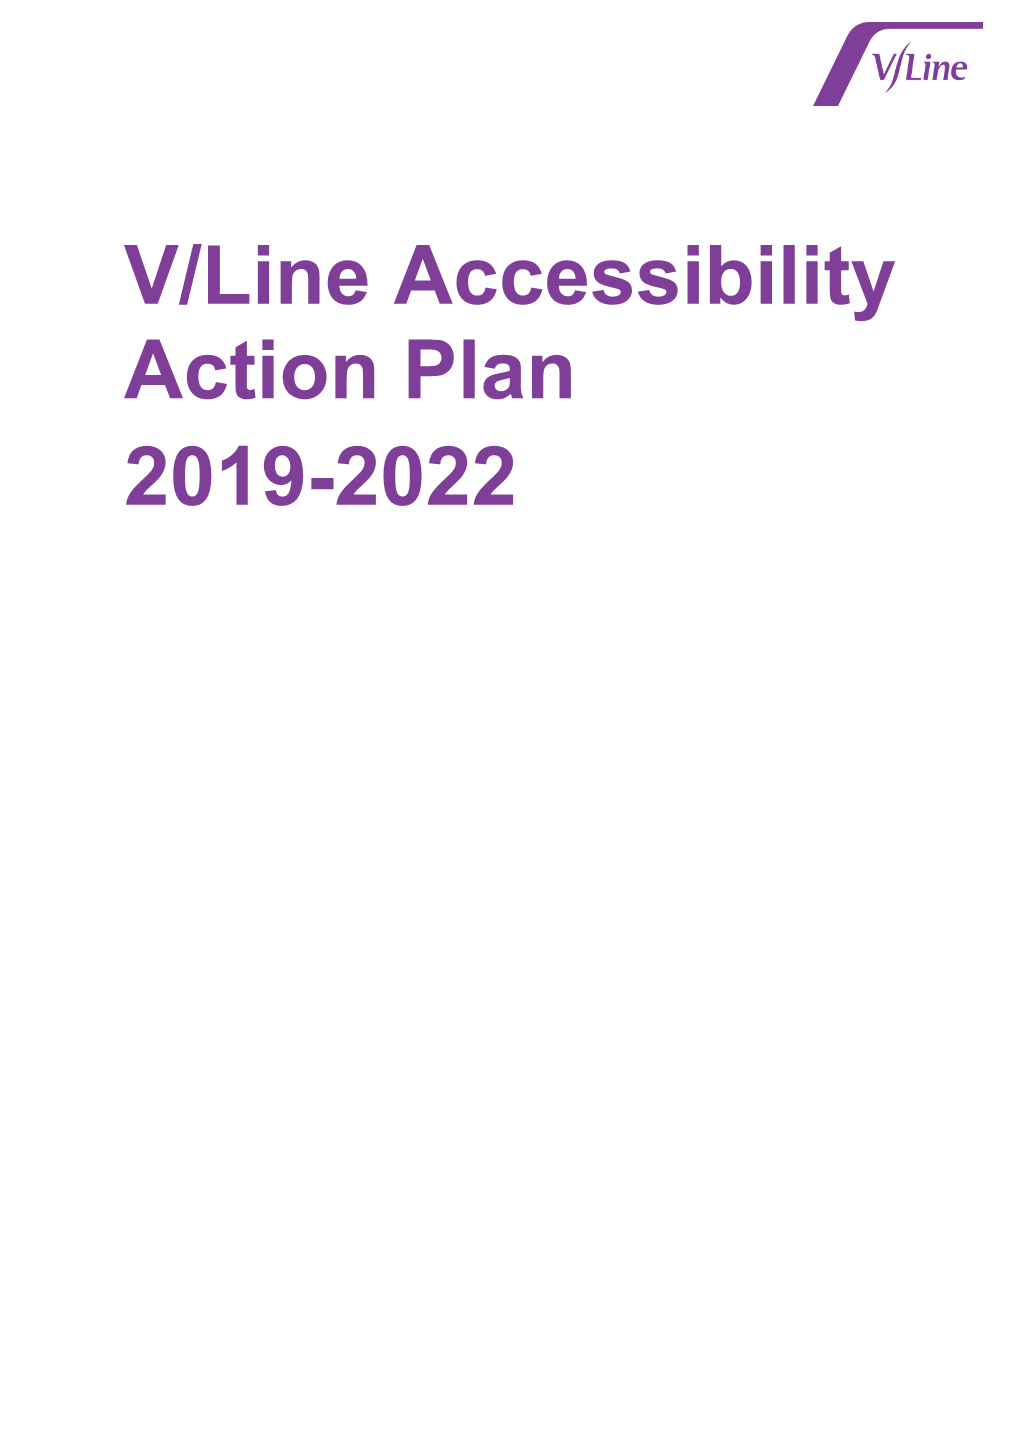 V/Line Accessibility Action Plan 2019-2022